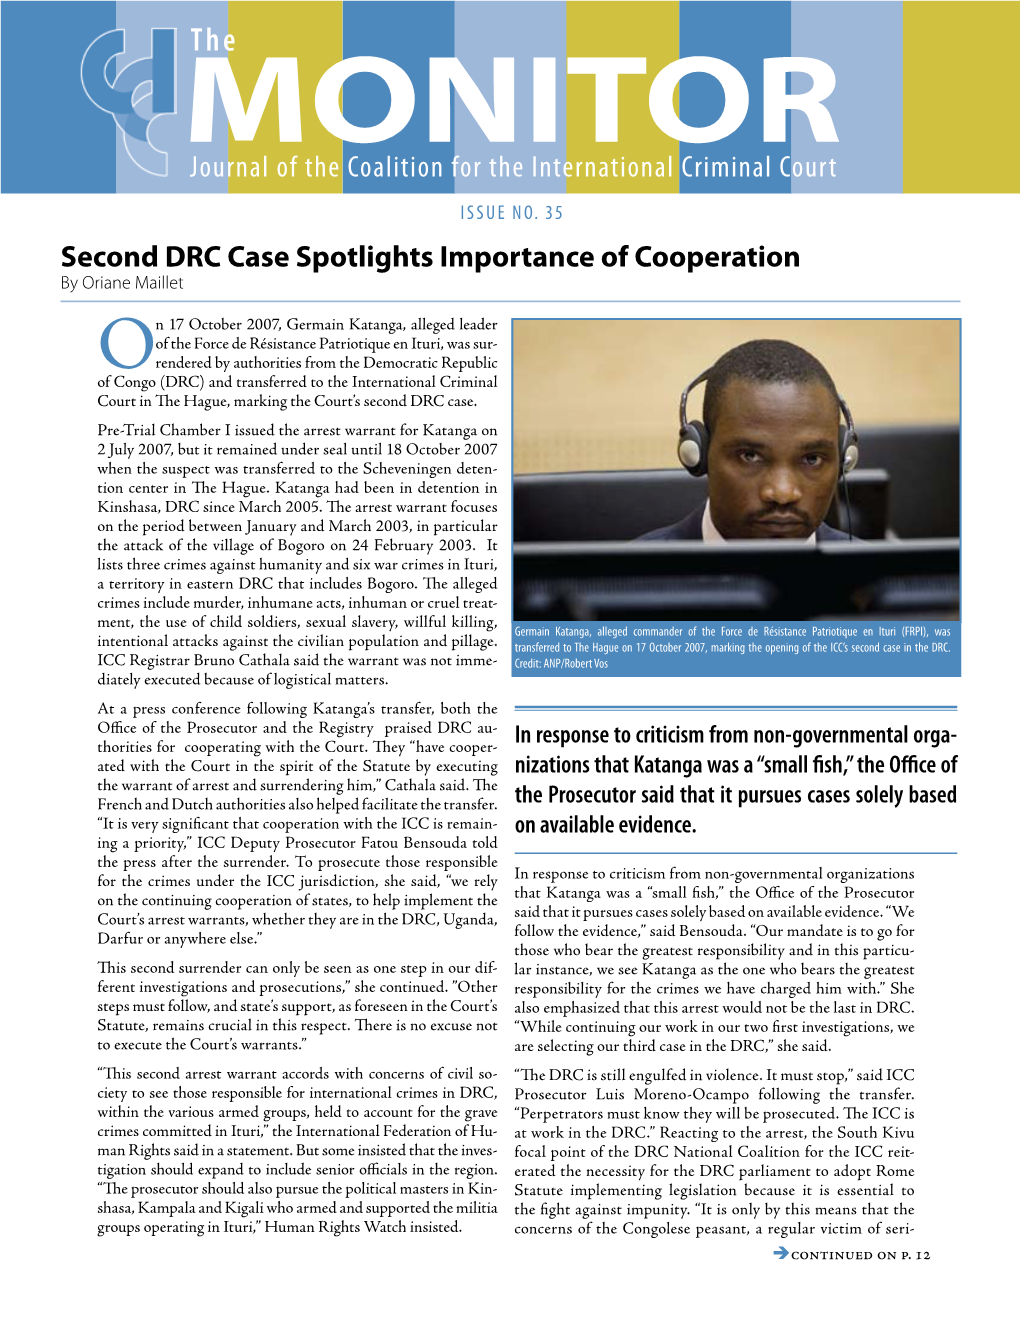 Second DRC Case Spotlights Importance of Cooperation by Oriane Maillet